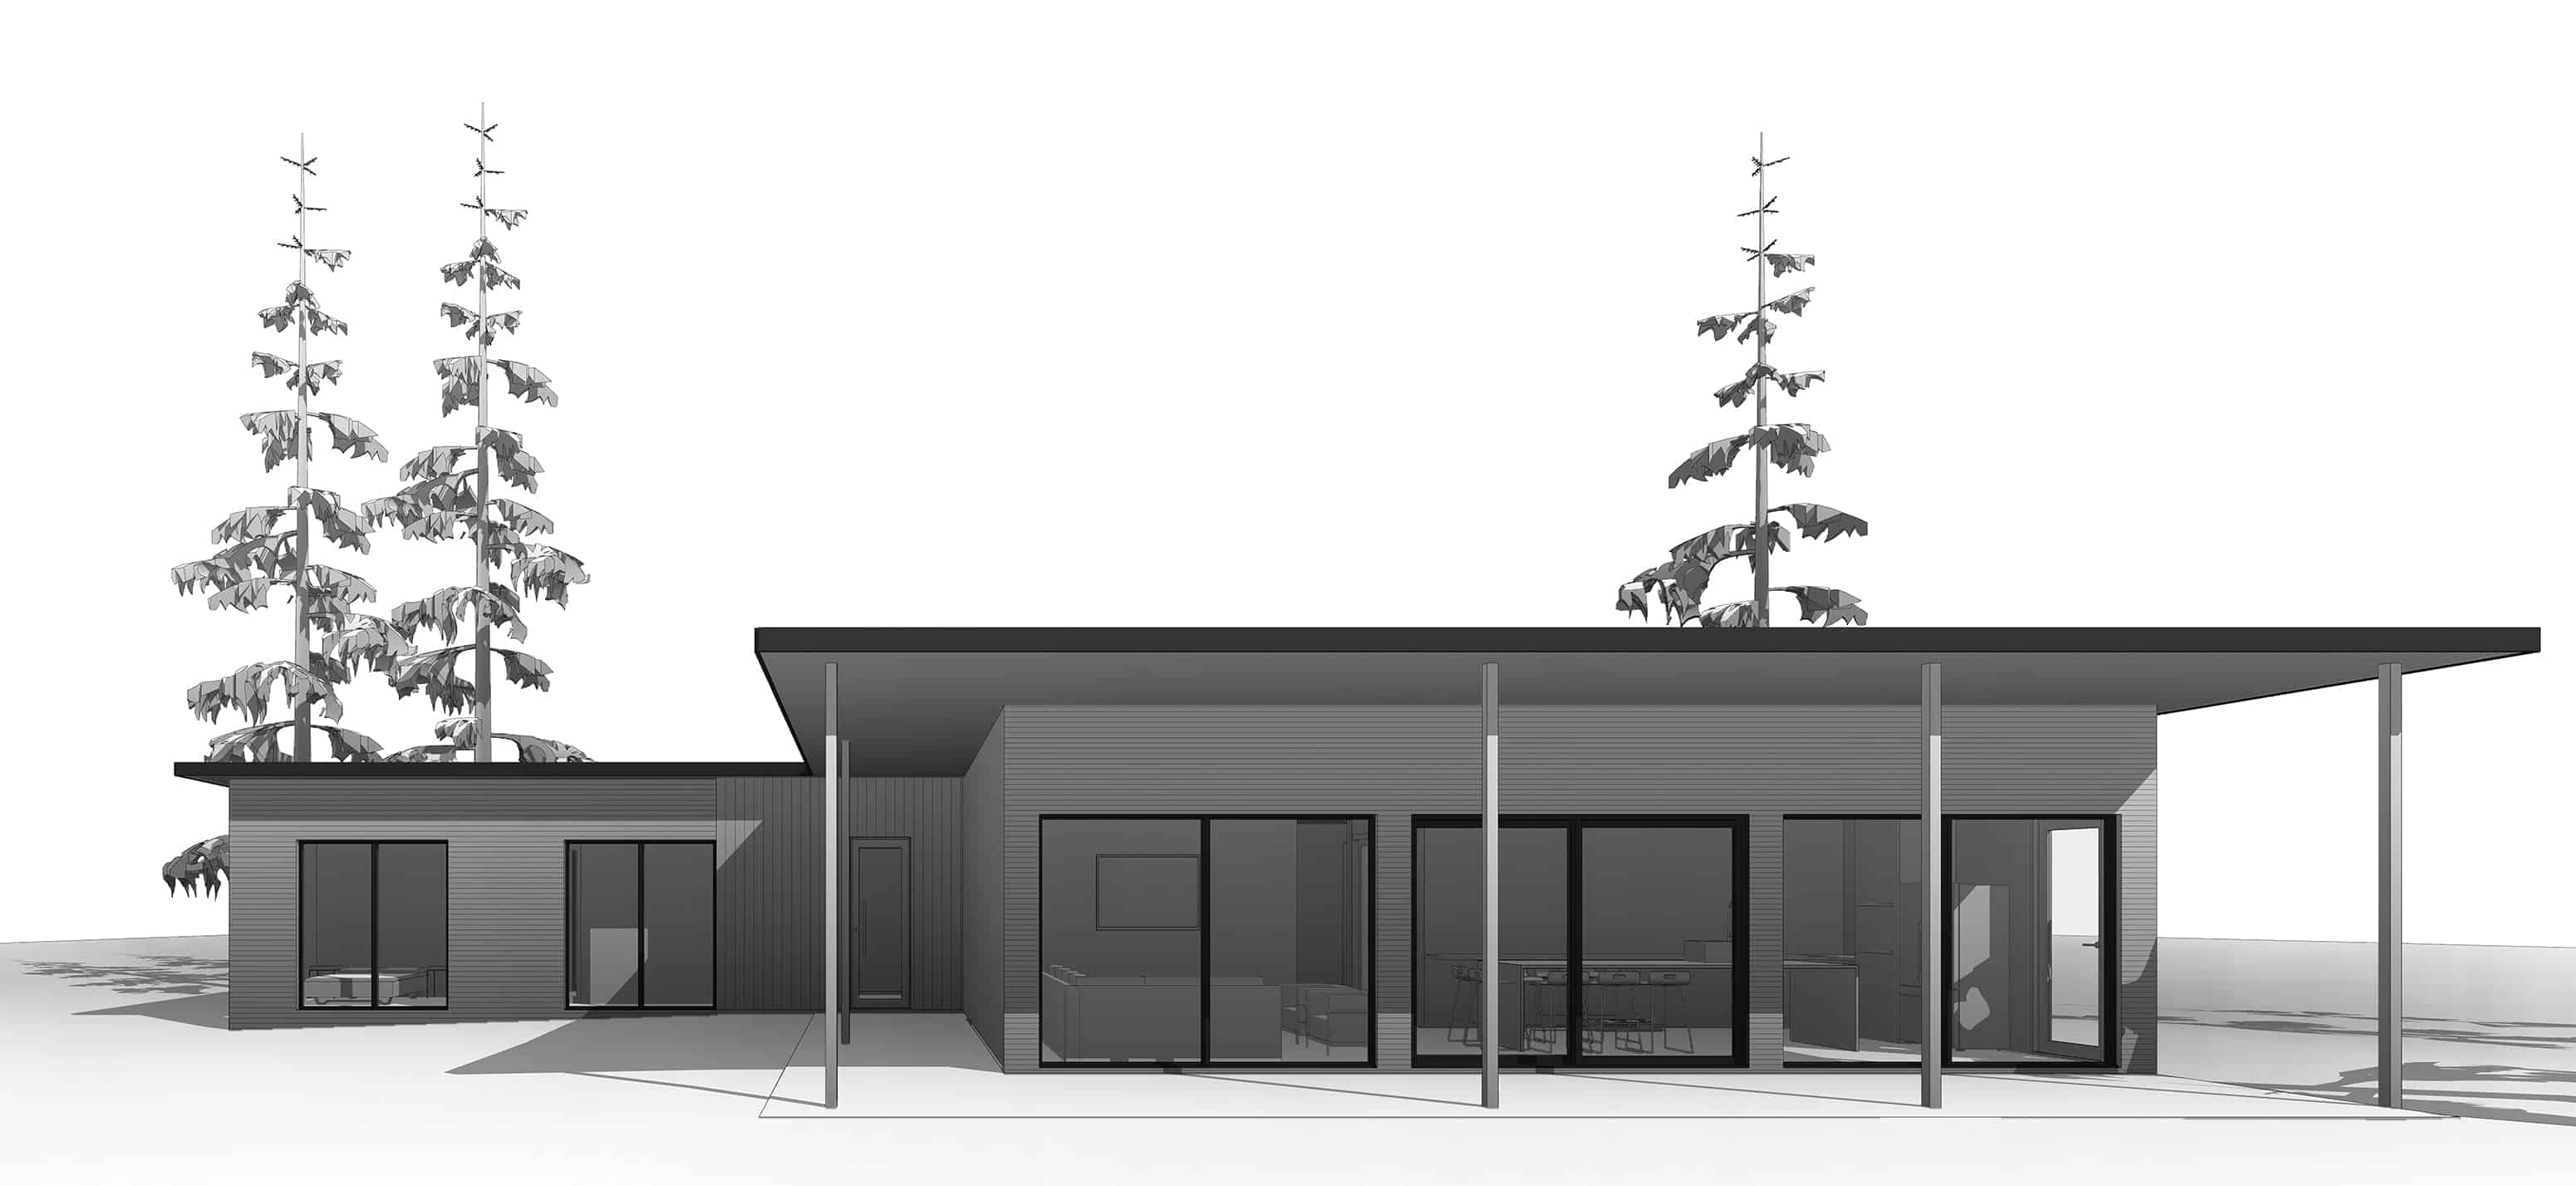 Dvele Sollys modern prefab home elevation drawing of rear of home.